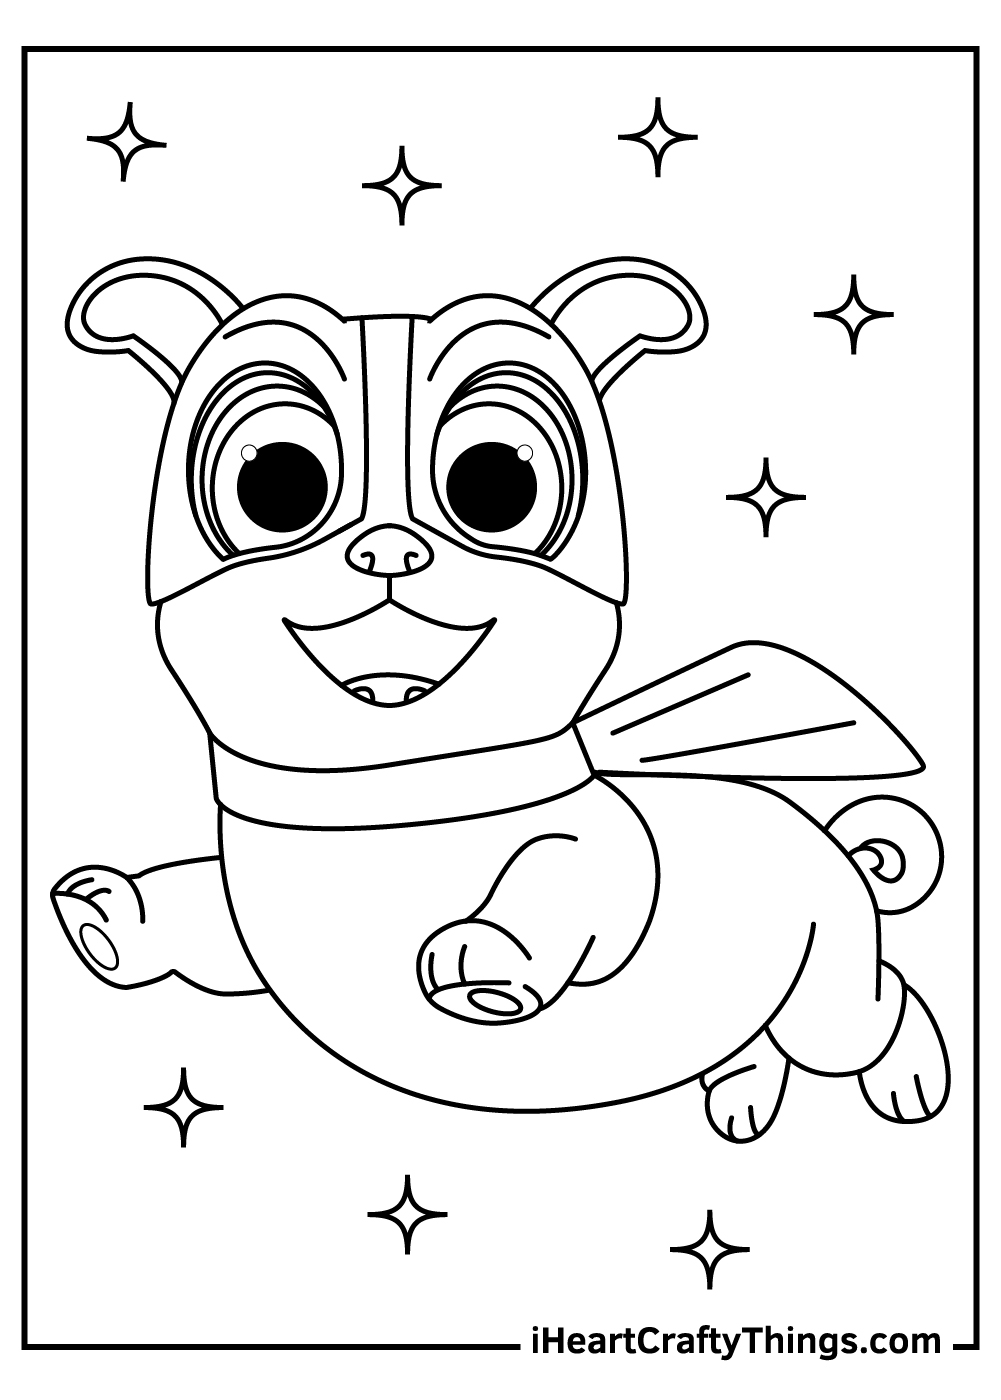 Puppy dog pals coloring pages free printables